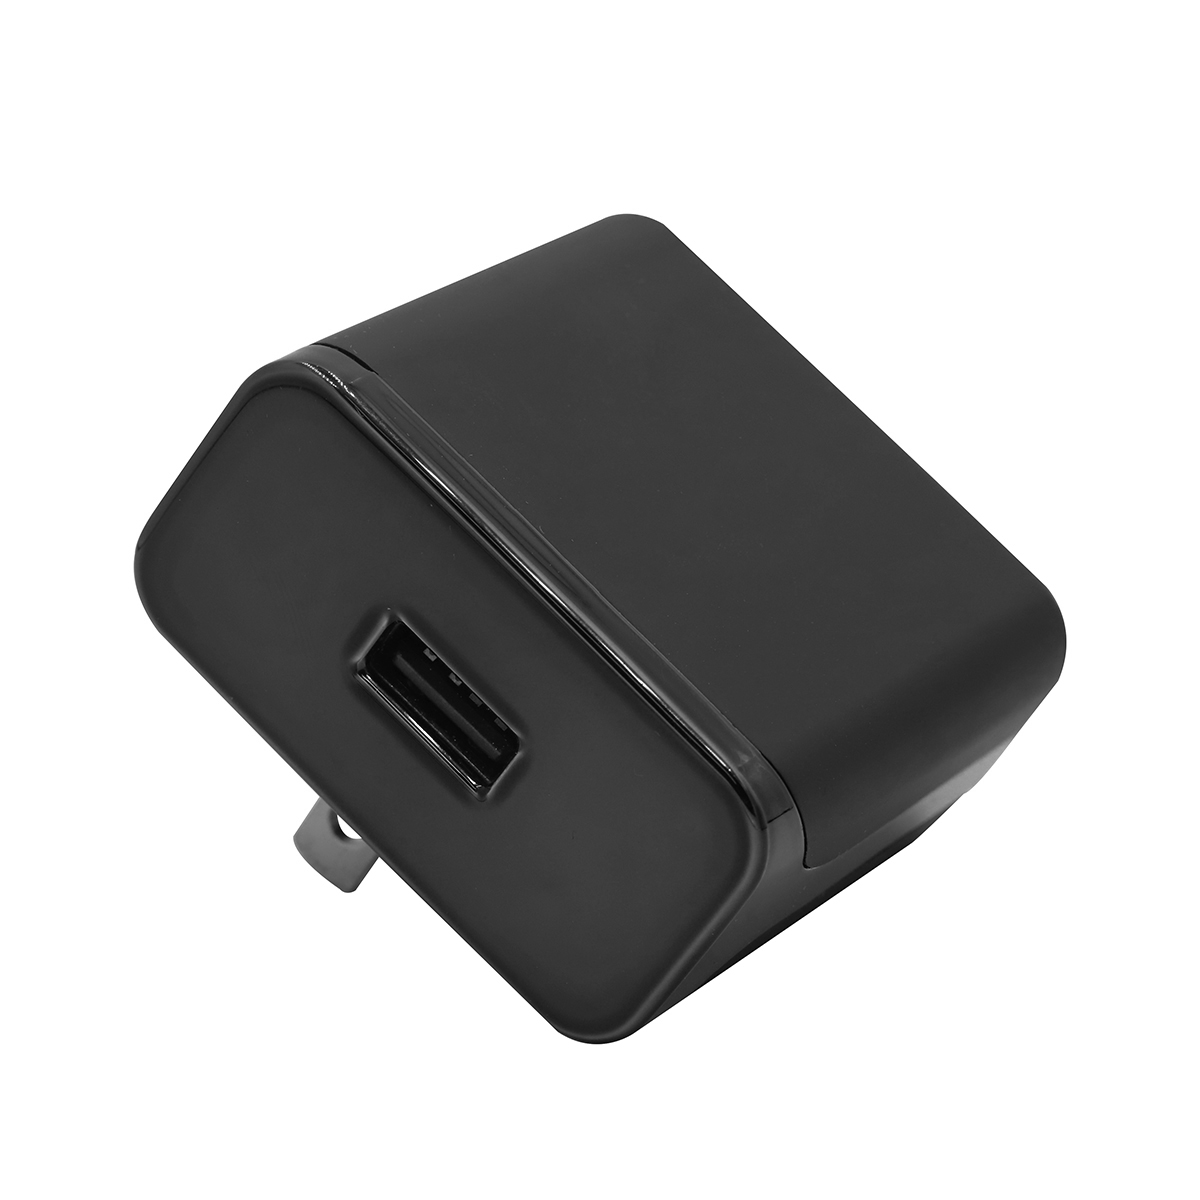 3. LM-CHG1033 USB Wall Charger Corporate Purchase and bulk purchase from China Union Power -Description-